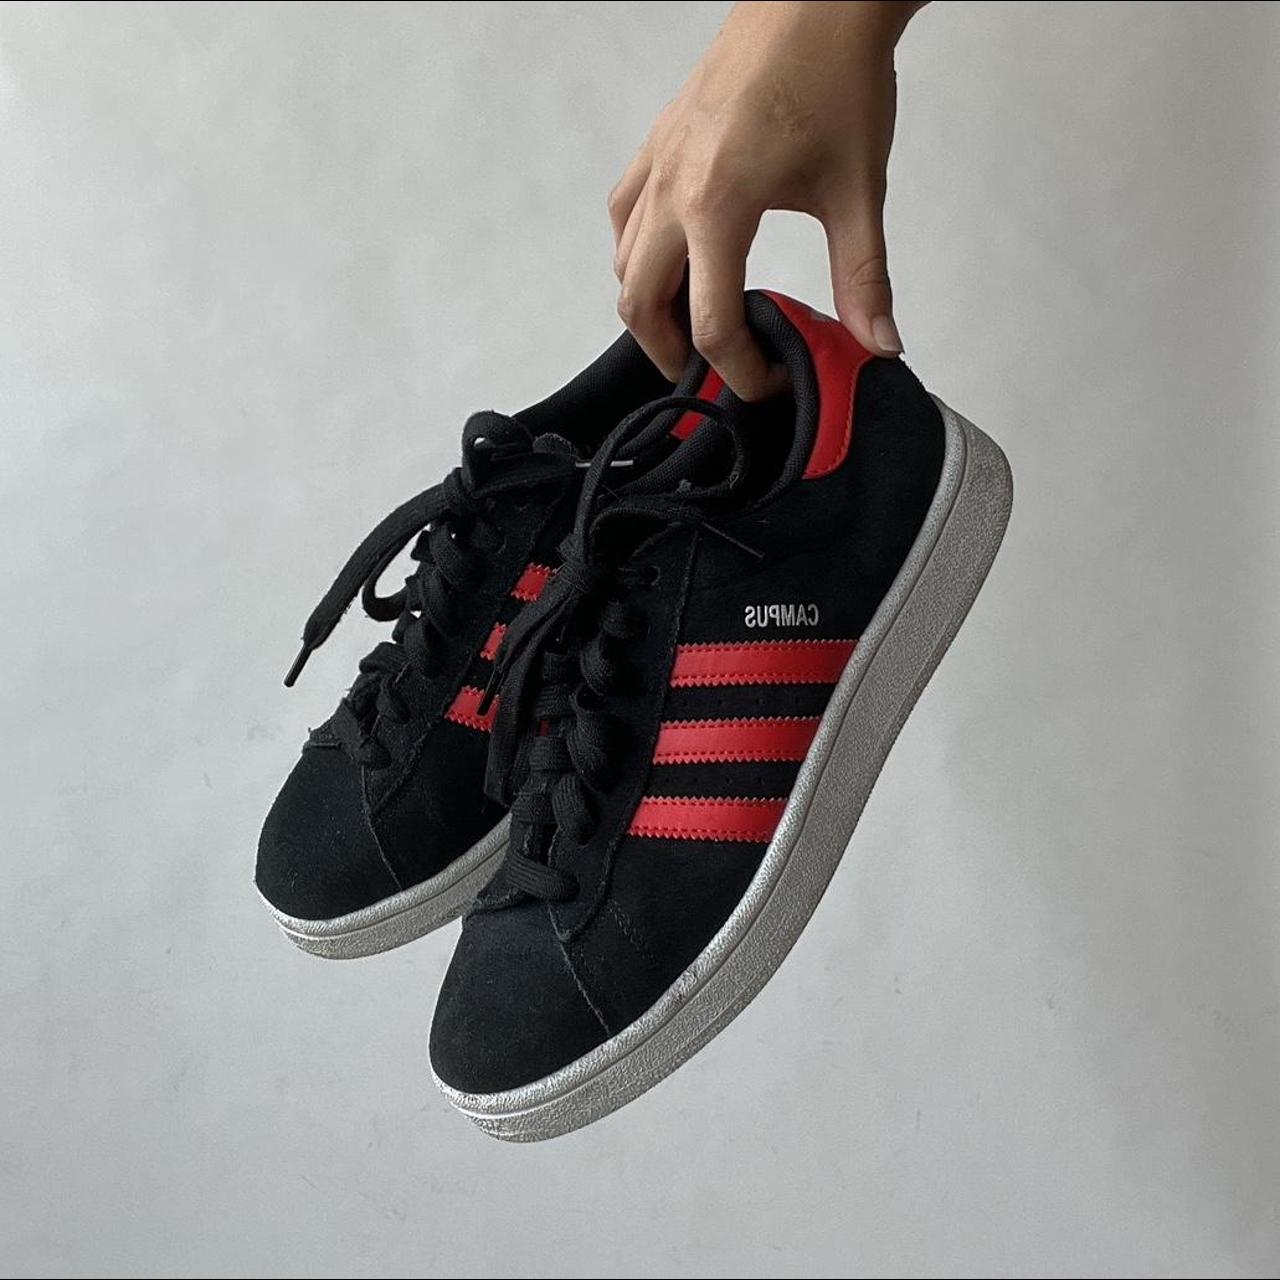 Turbulens Hates Tolkning Adidas Campus black and red color way. Flaw of... - Depop